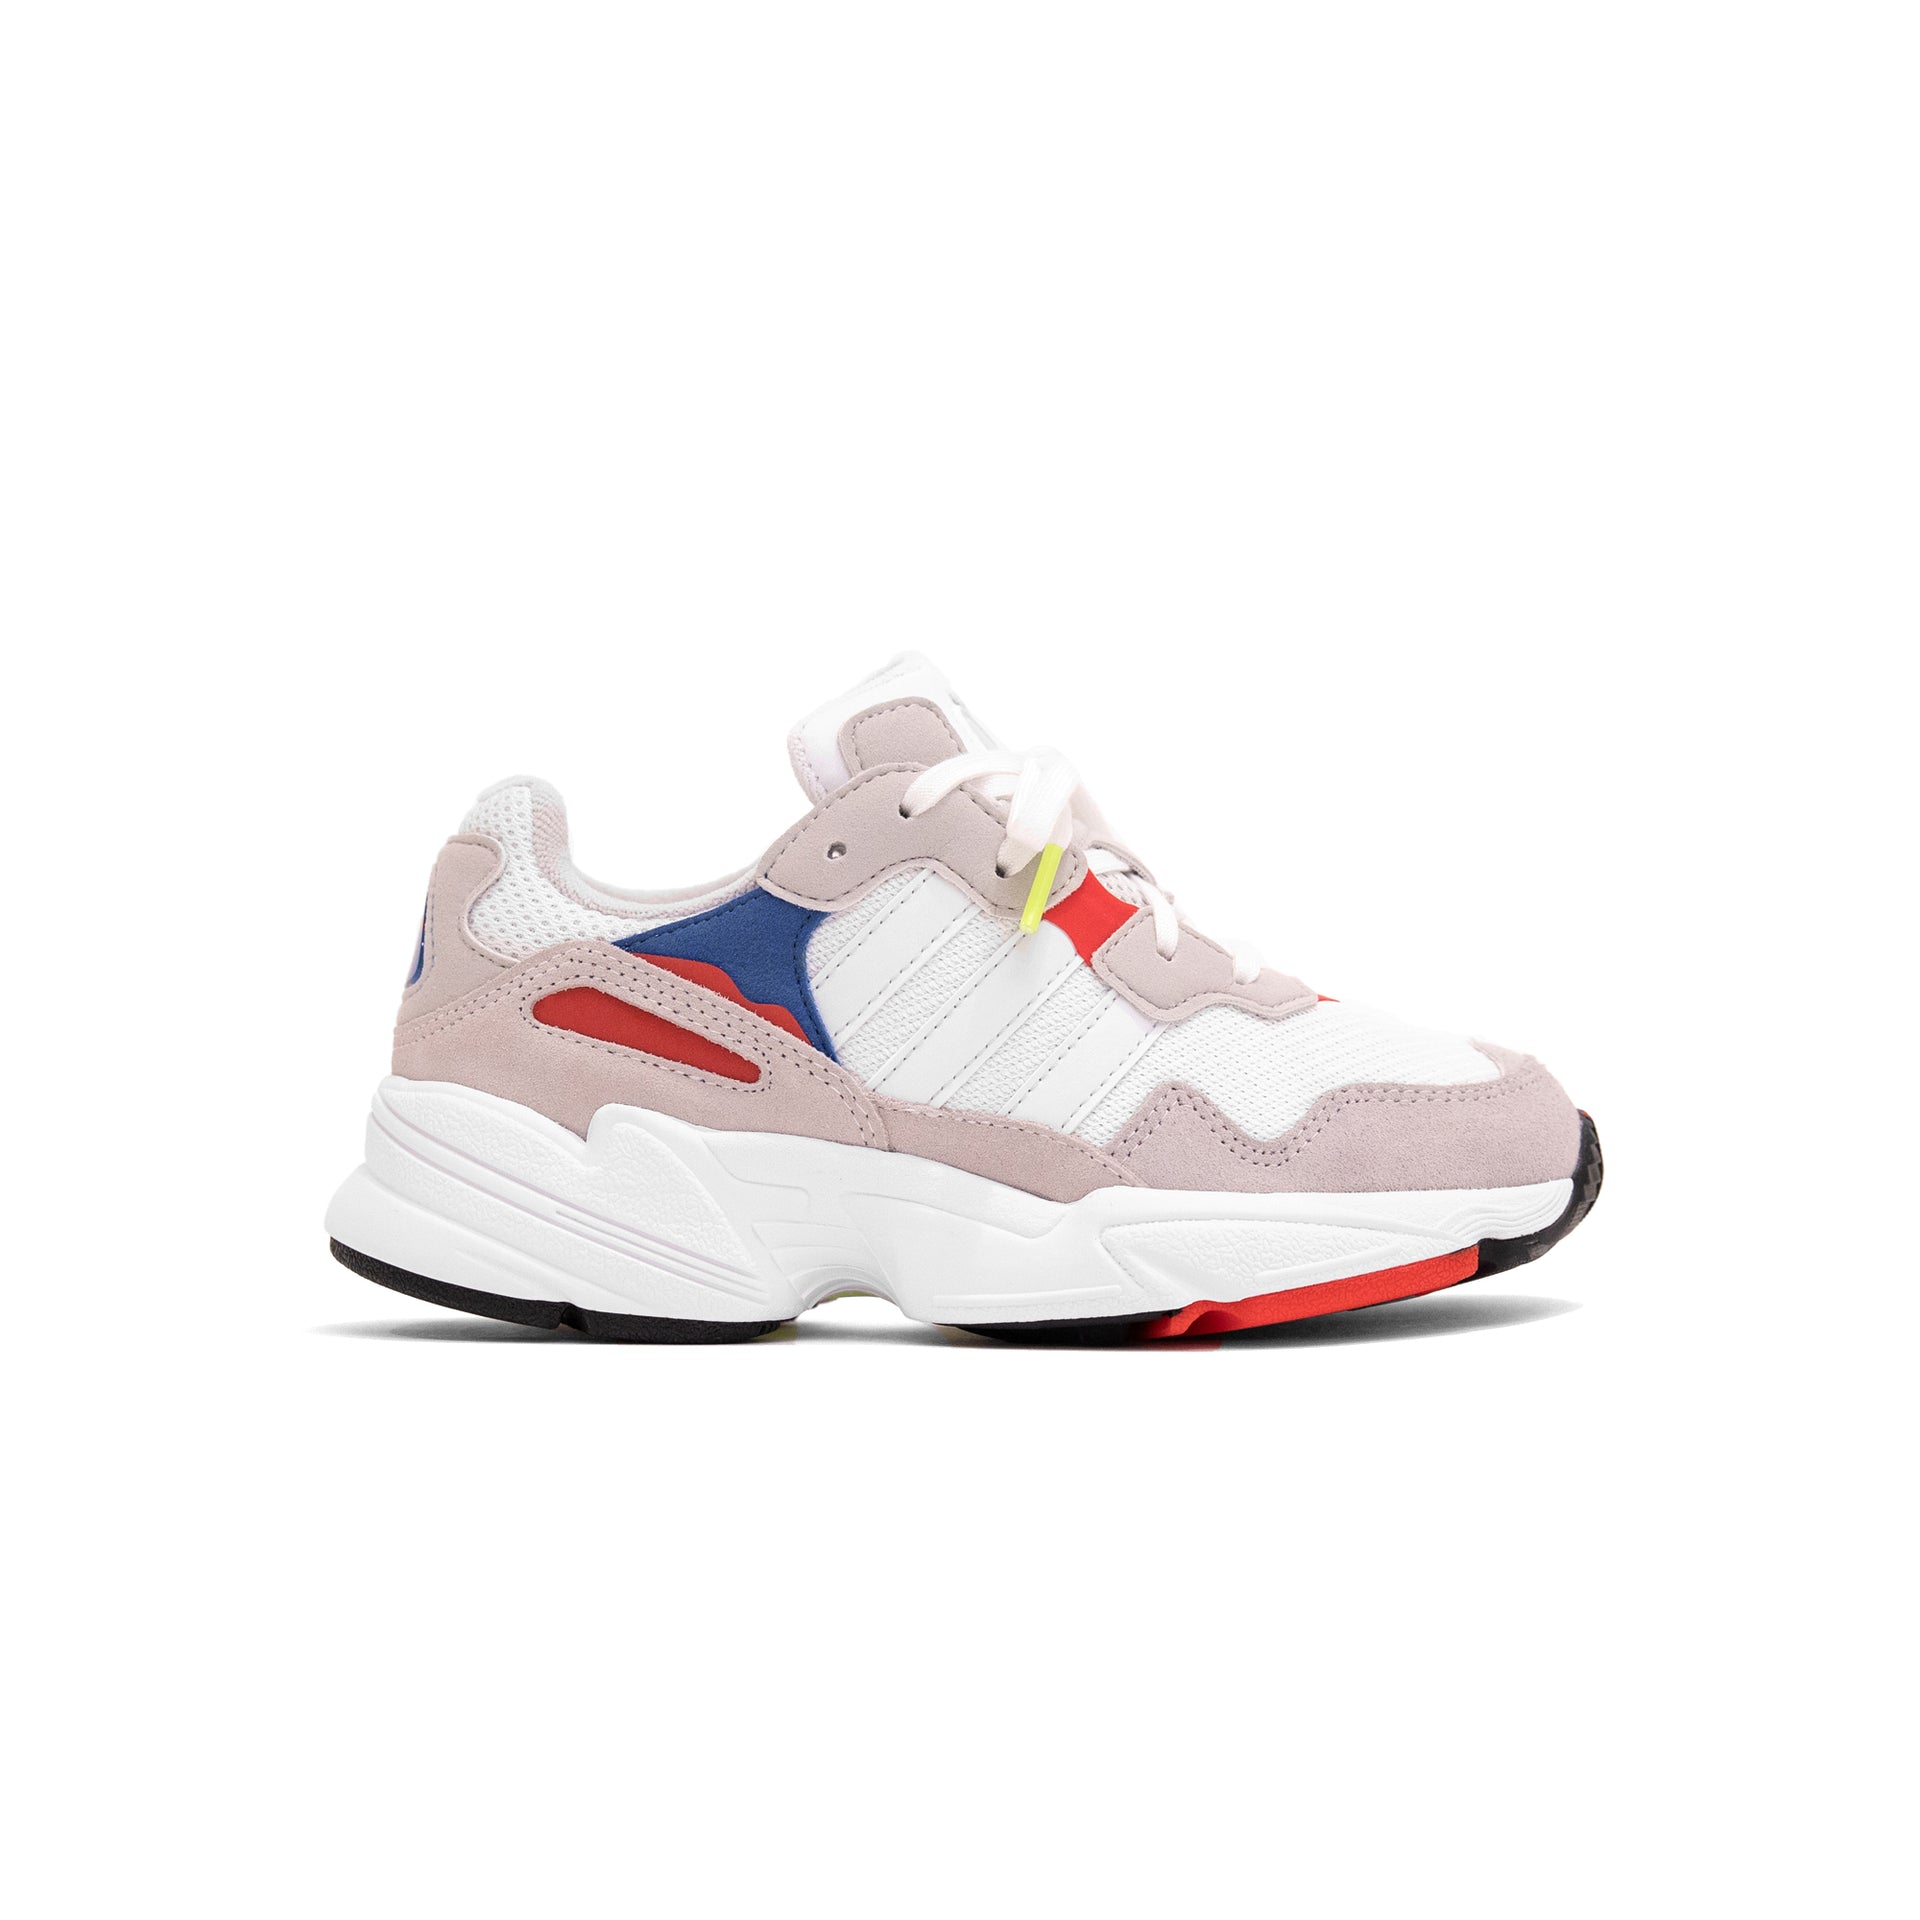 adidas Falcon Junior - White / Crystal White / Active Red